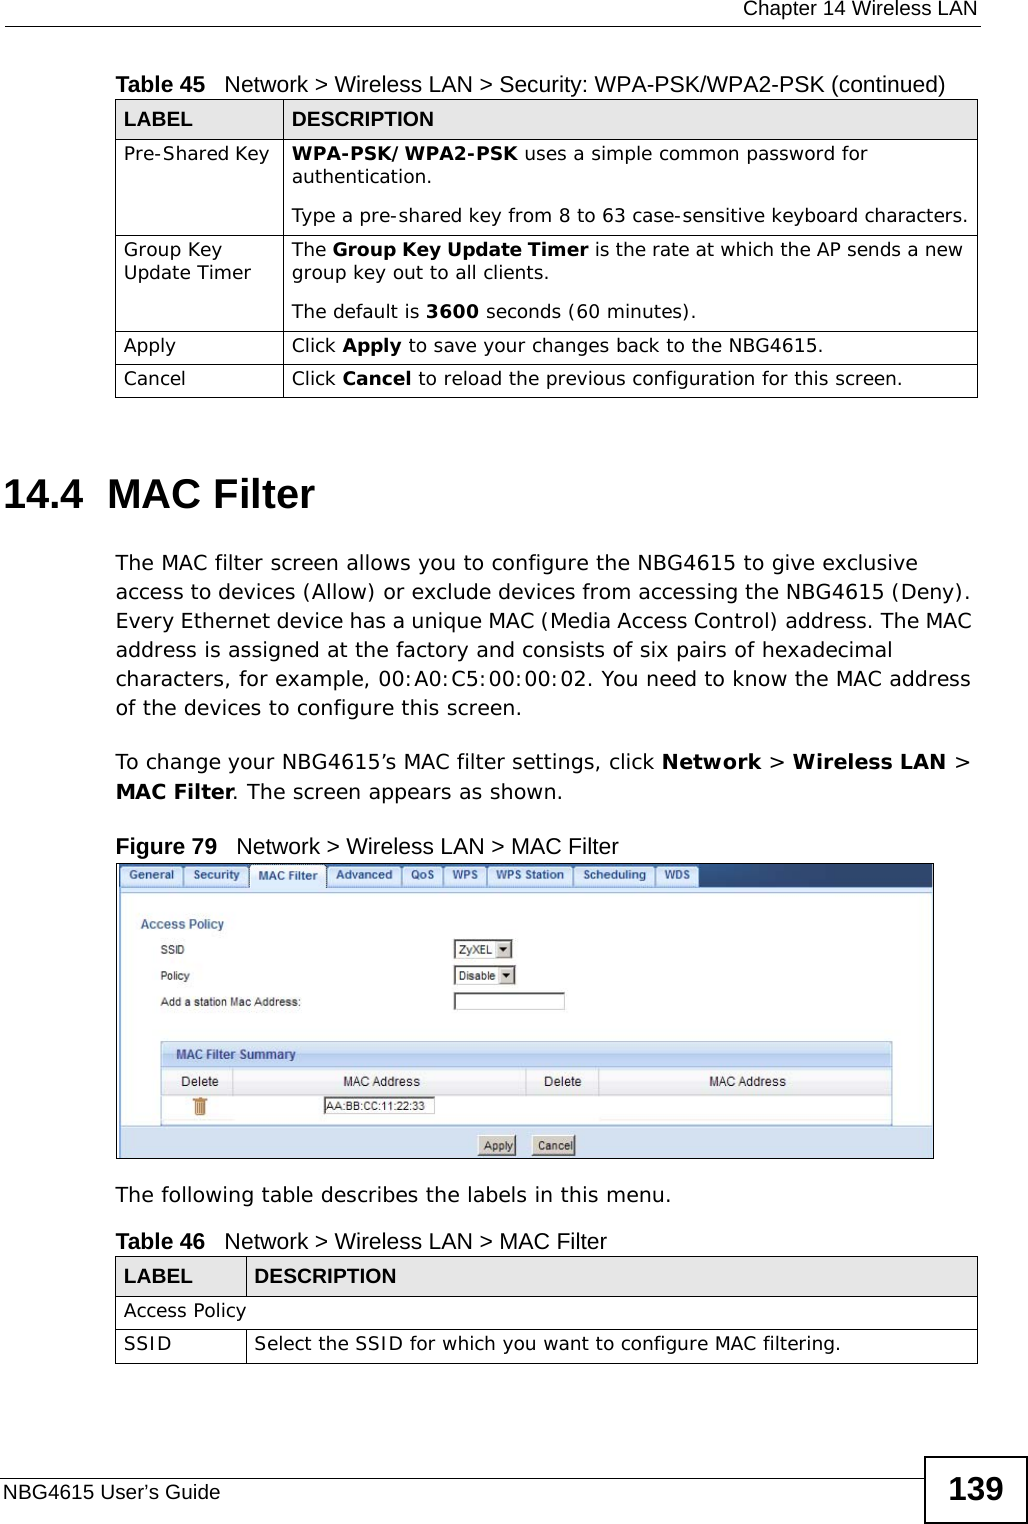  Chapter 14 Wireless LANNBG4615 User’s Guide 13914.4  MAC FilterThe MAC filter screen allows you to configure the NBG4615 to give exclusive access to devices (Allow) or exclude devices from accessing the NBG4615 (Deny). Every Ethernet device has a unique MAC (Media Access Control) address. The MAC address is assigned at the factory and consists of six pairs of hexadecimal characters, for example, 00:A0:C5:00:00:02. You need to know the MAC address of the devices to configure this screen.To change your NBG4615’s MAC filter settings, click Network &gt; Wireless LAN &gt; MAC Filter. The screen appears as shown.Figure 79   Network &gt; Wireless LAN &gt; MAC FilterThe following table describes the labels in this menu.Pre-Shared Key  WPA-PSK/WPA2-PSK uses a simple common password for authentication.Type a pre-shared key from 8 to 63 case-sensitive keyboard characters.Group Key Update Timer The Group Key Update Timer is the rate at which the AP sends a new group key out to all clients. The default is 3600 seconds (60 minutes).Apply Click Apply to save your changes back to the NBG4615.Cancel Click Cancel to reload the previous configuration for this screen.Table 45   Network &gt; Wireless LAN &gt; Security: WPA-PSK/WPA2-PSK (continued)LABEL DESCRIPTIONTable 46   Network &gt; Wireless LAN &gt; MAC FilterLABEL DESCRIPTIONAccess PolicySSID Select the SSID for which you want to configure MAC filtering.